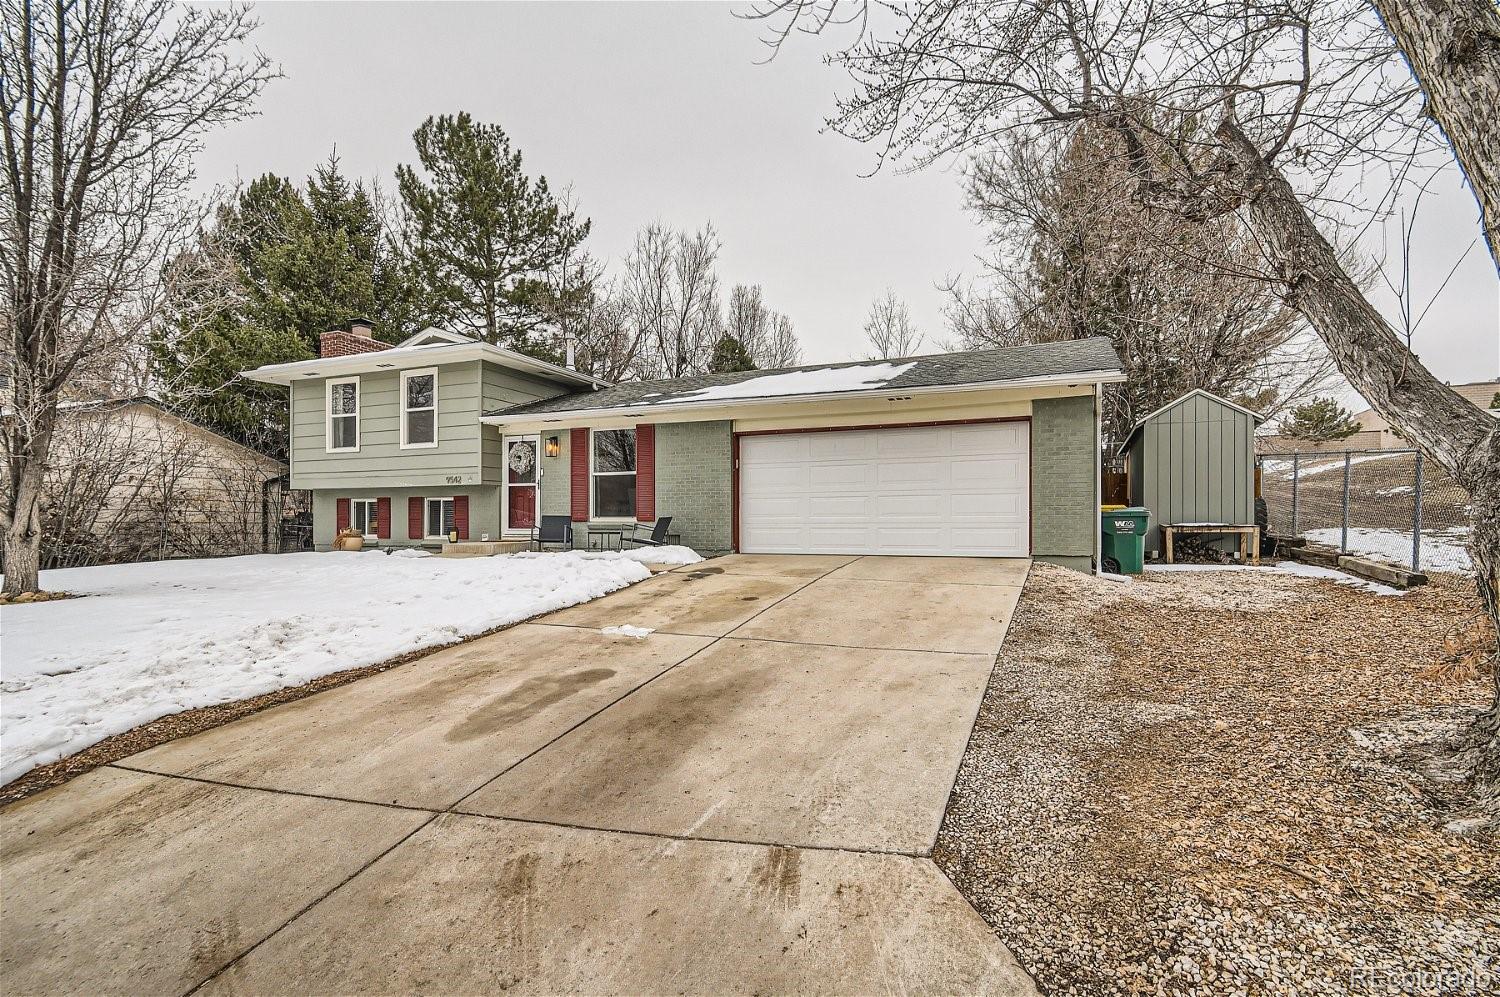 Report Image for 9542 W Cornell Place,Lakewood, Colorado